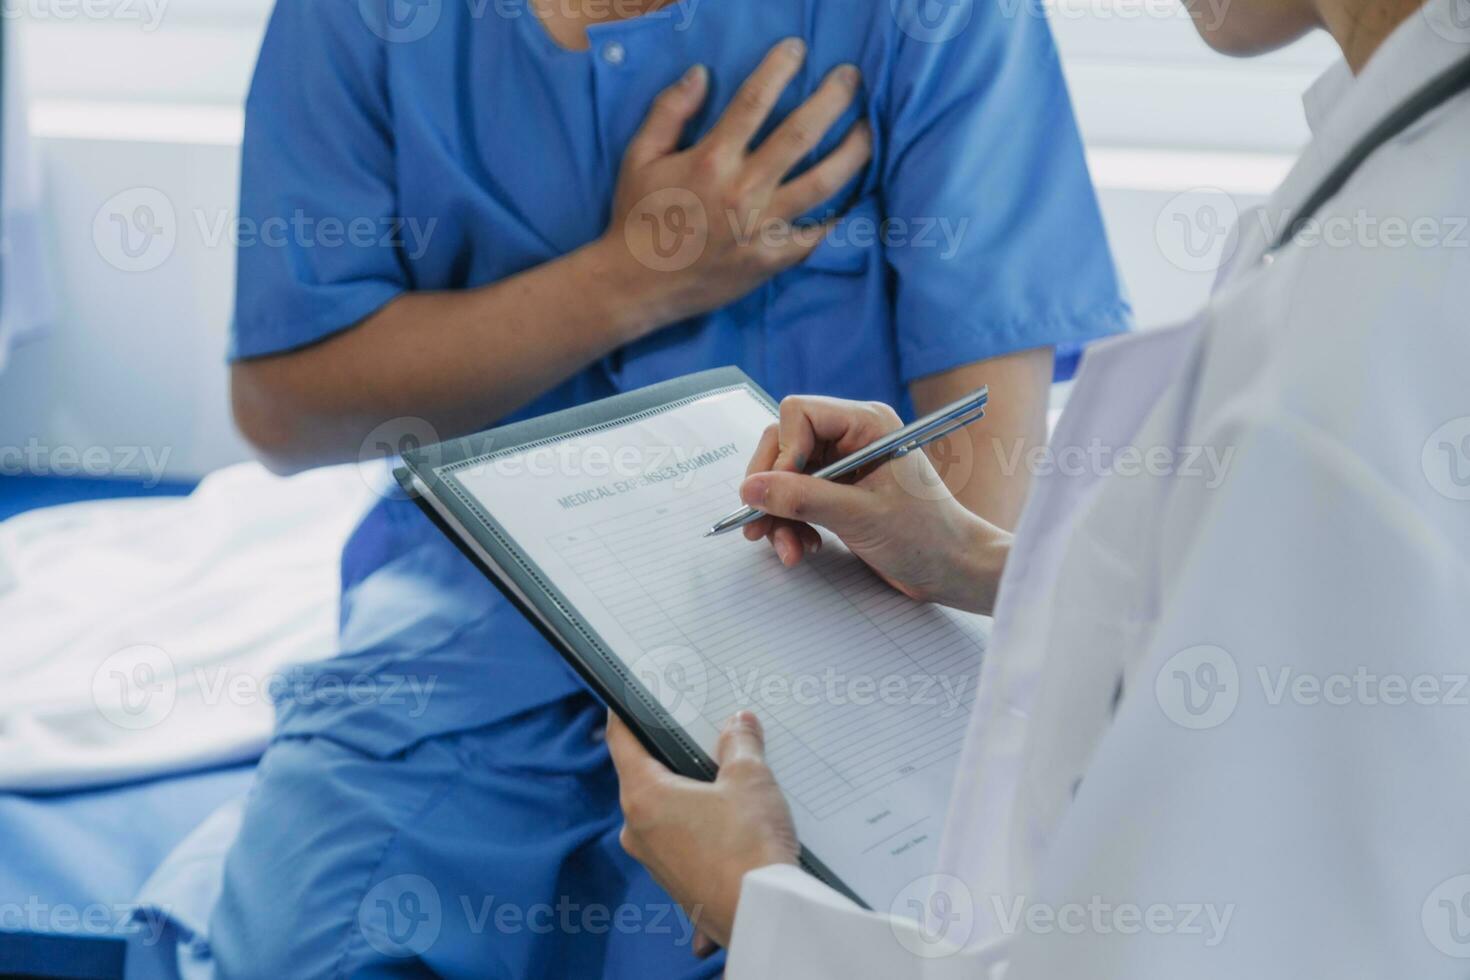 Male patient having consultation with doctor or psychiatrist who working on diagnostic examination on men's health disease or mental illness in medical clinic or hospital mental health service center photo